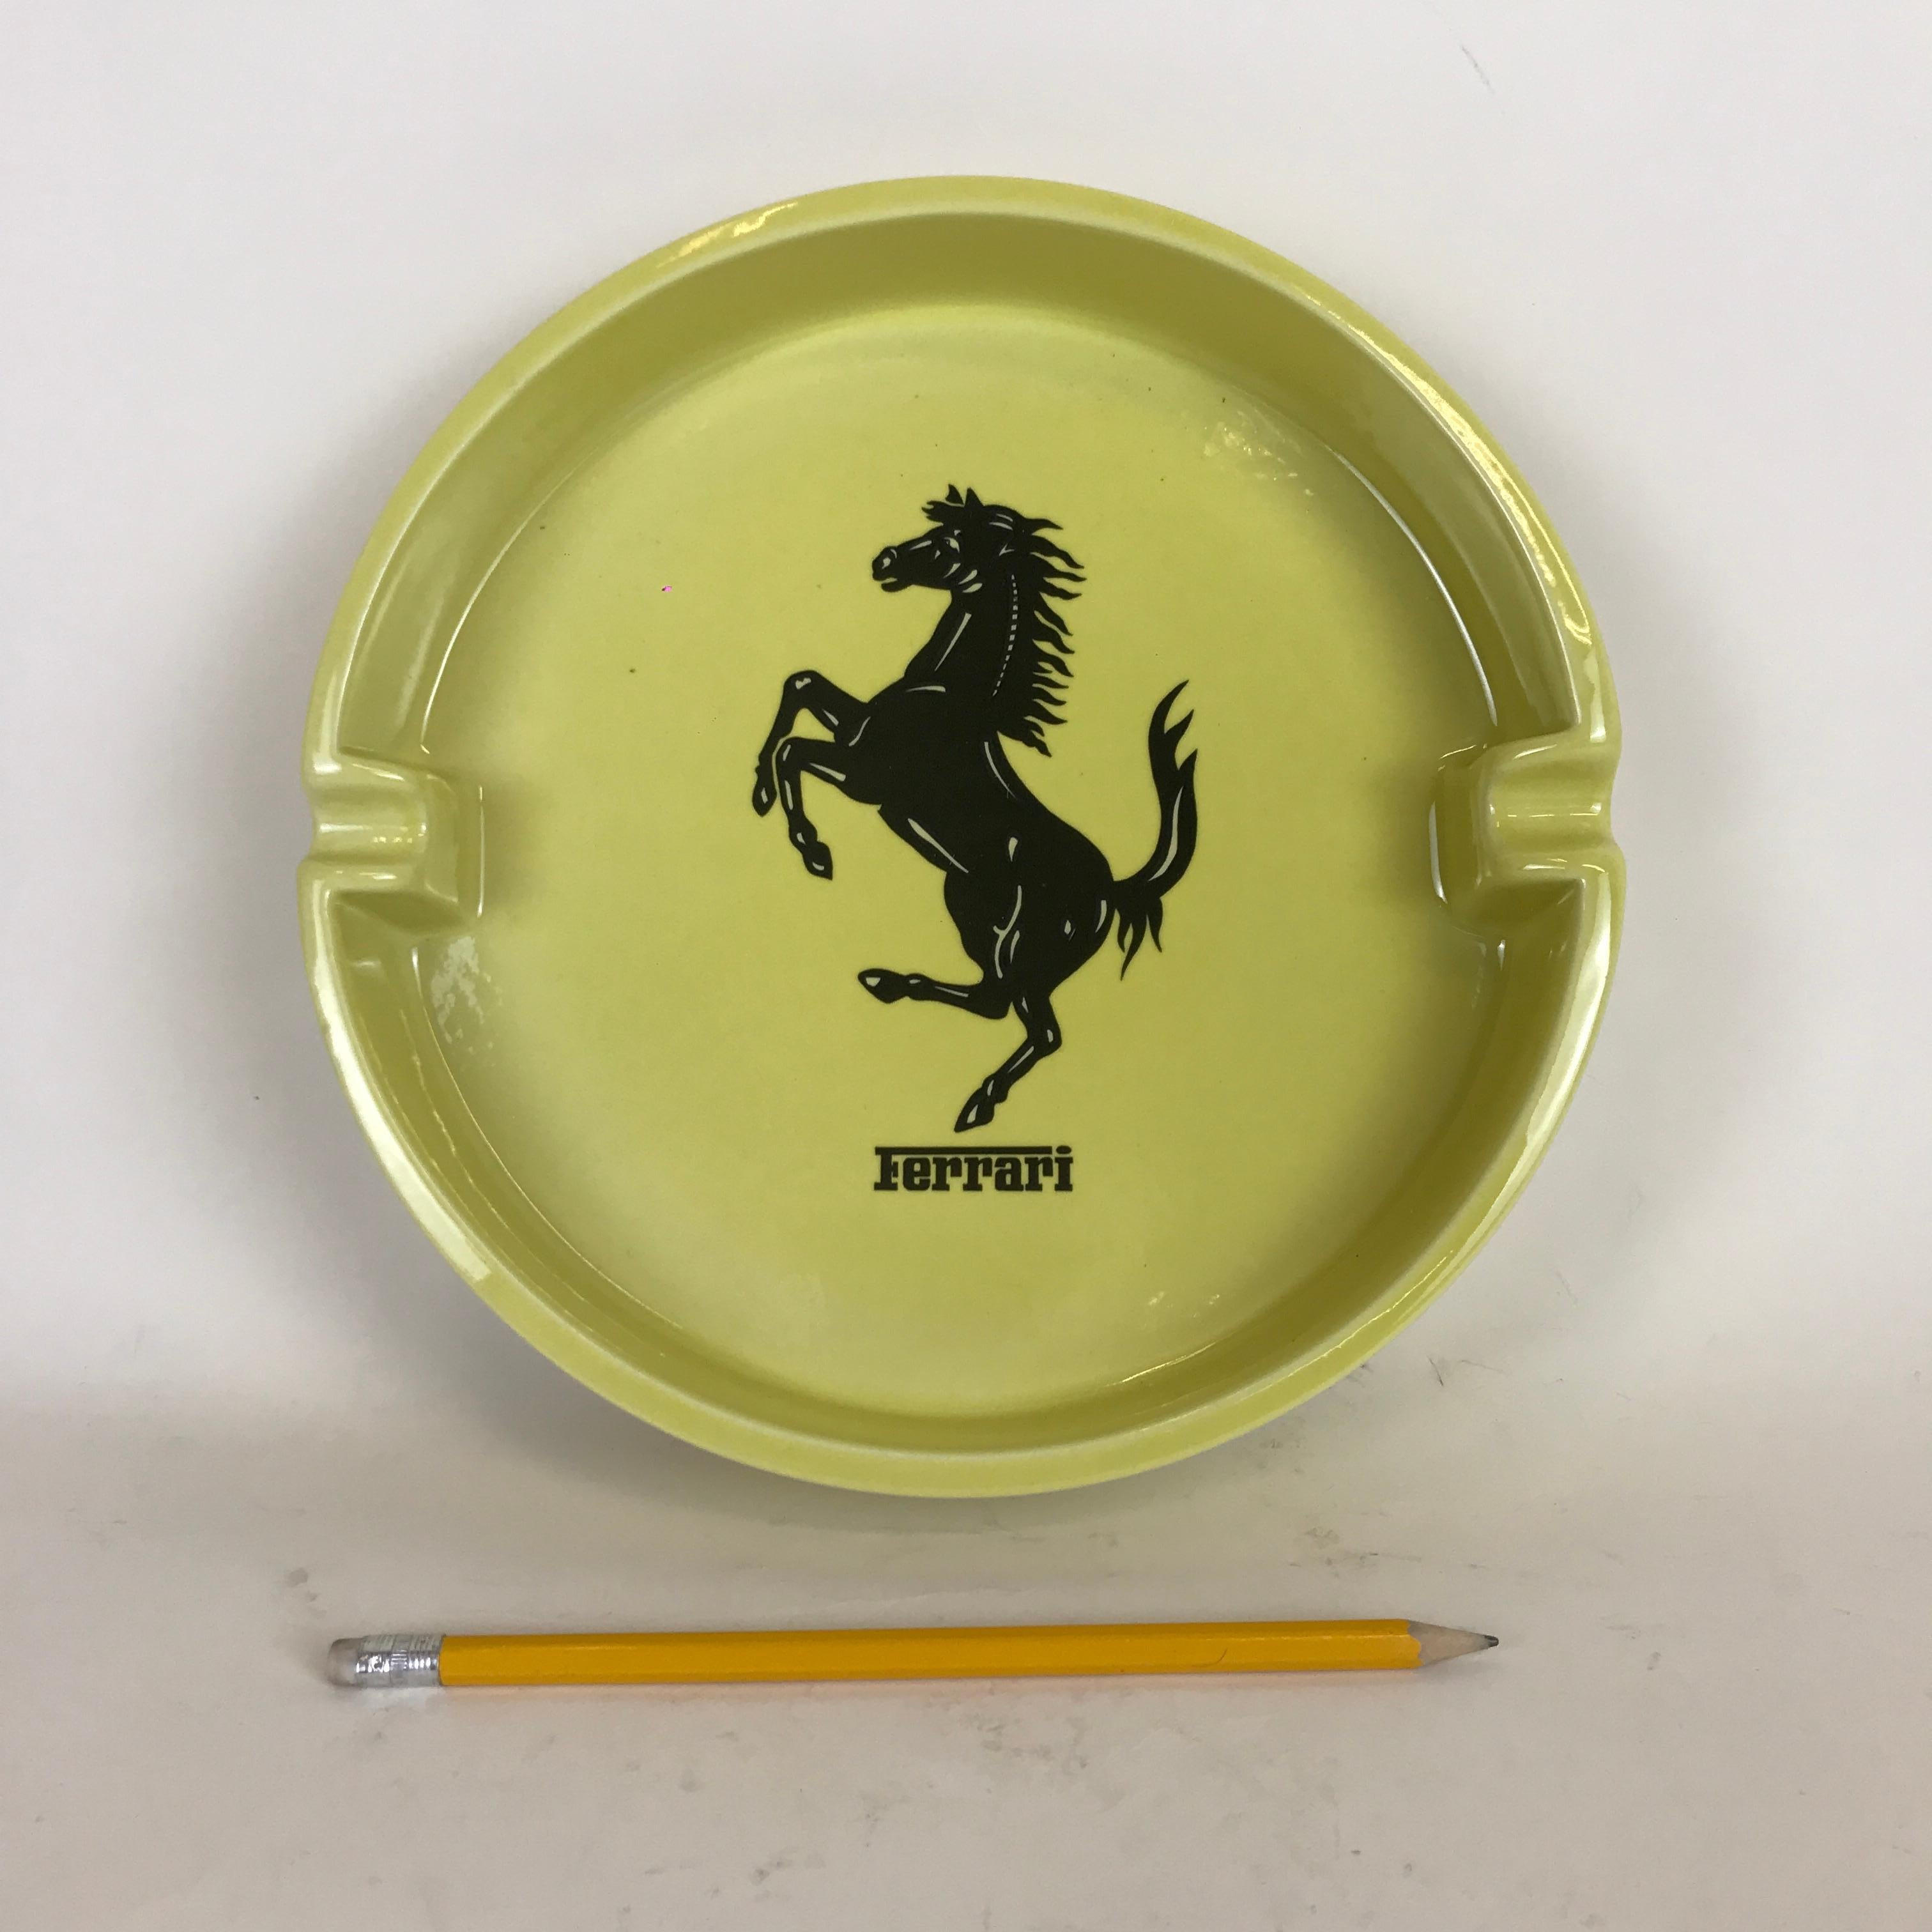 Ferrari advertising ashtray in yellow ceramic made in Italy by Bitossi in the 1980s. This large circular ashtray has a black Ferrari horse symbol in the centre and one Ferrari logo outside on the border. It's also marked Bitossi on bottom. 

The